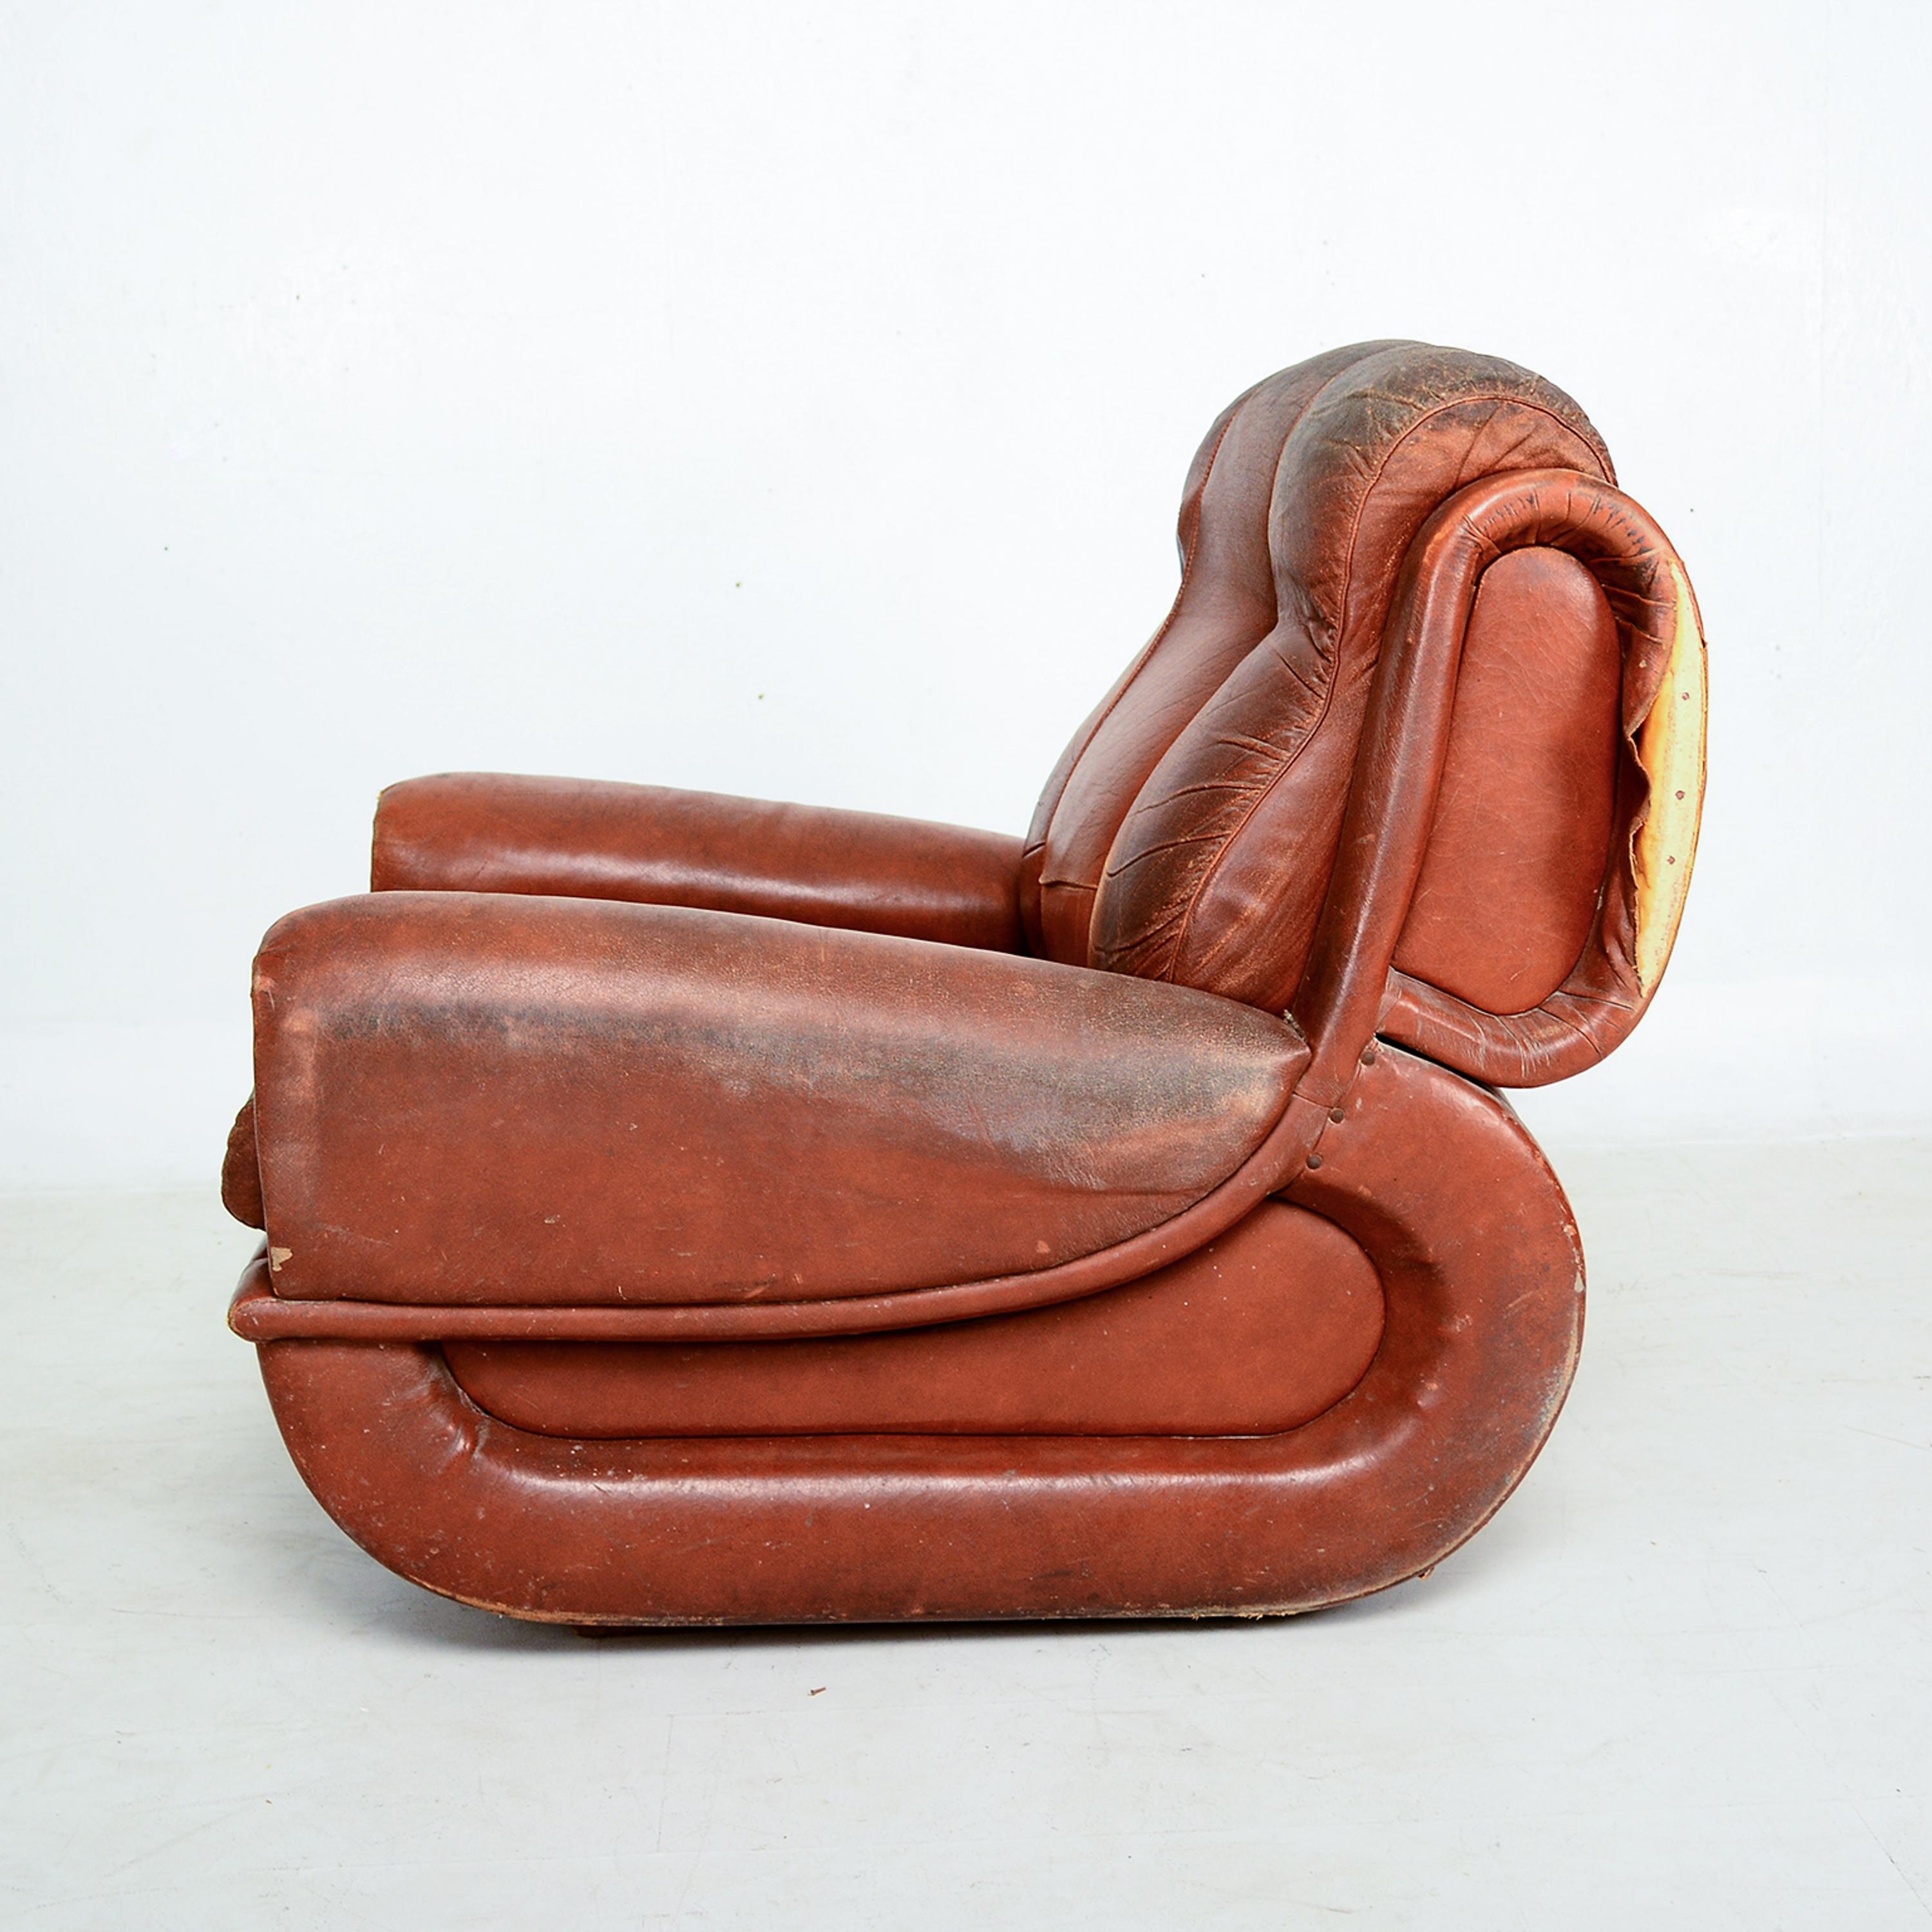 Faux Leather Guiseppe Munari for Poltrona Italian Lounge Chairs Tobacco Leather, Italy 1960s